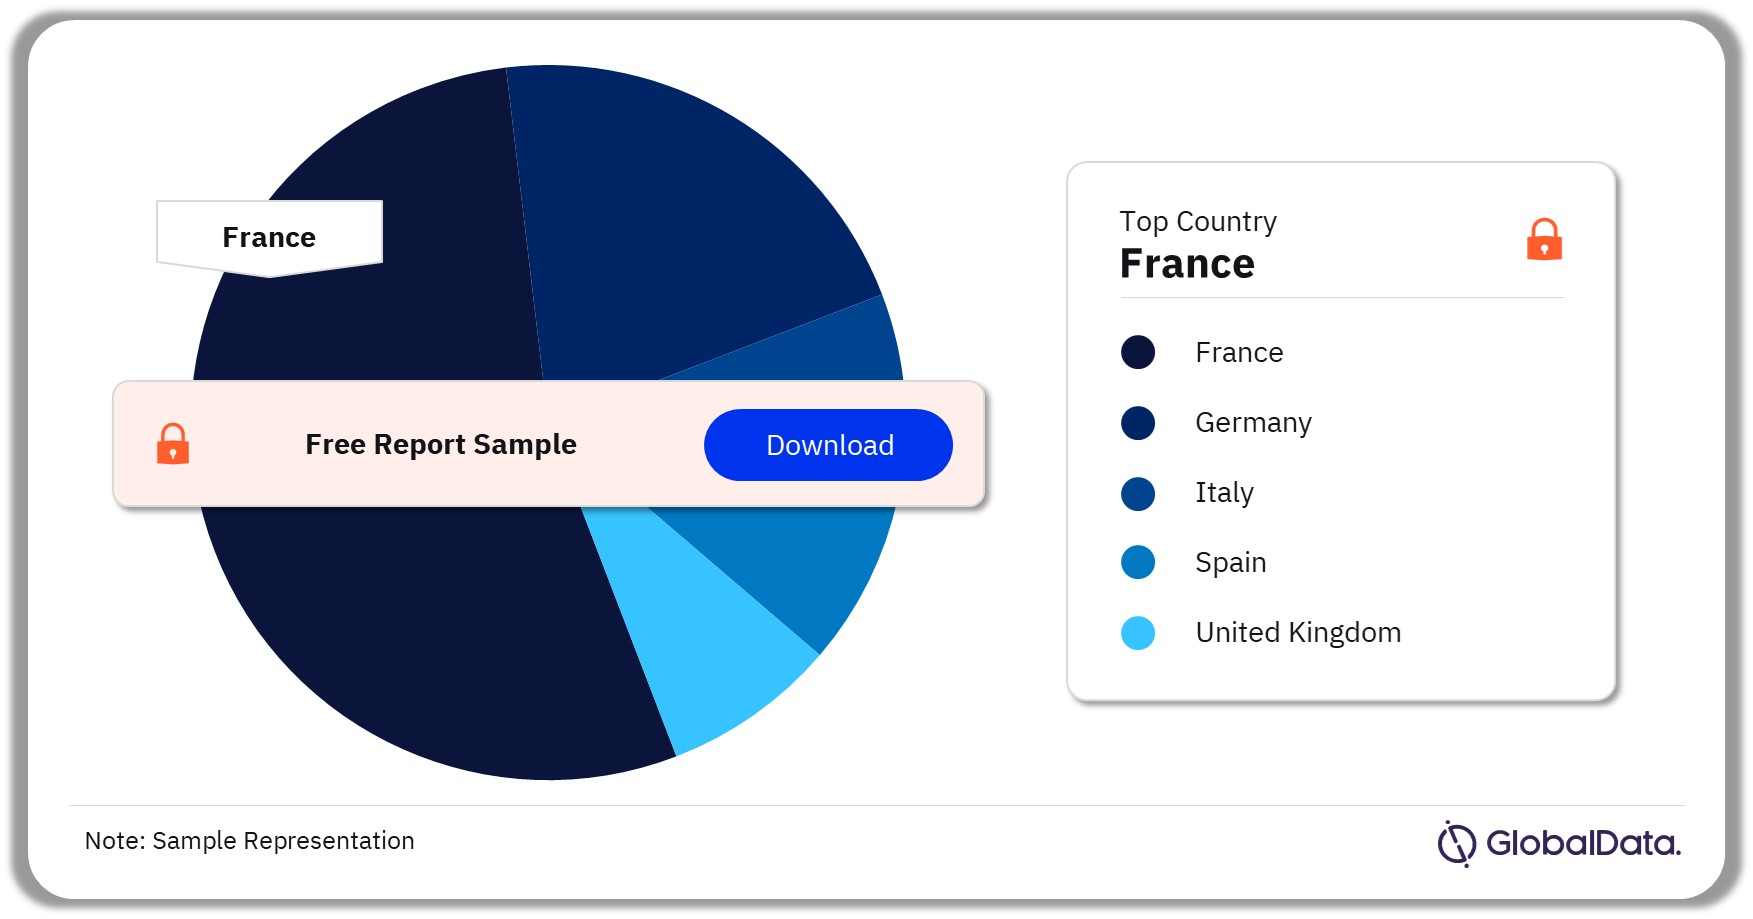 EU5 Wound Dressings Procedures Market Analysis by Countries, 2022 (%)